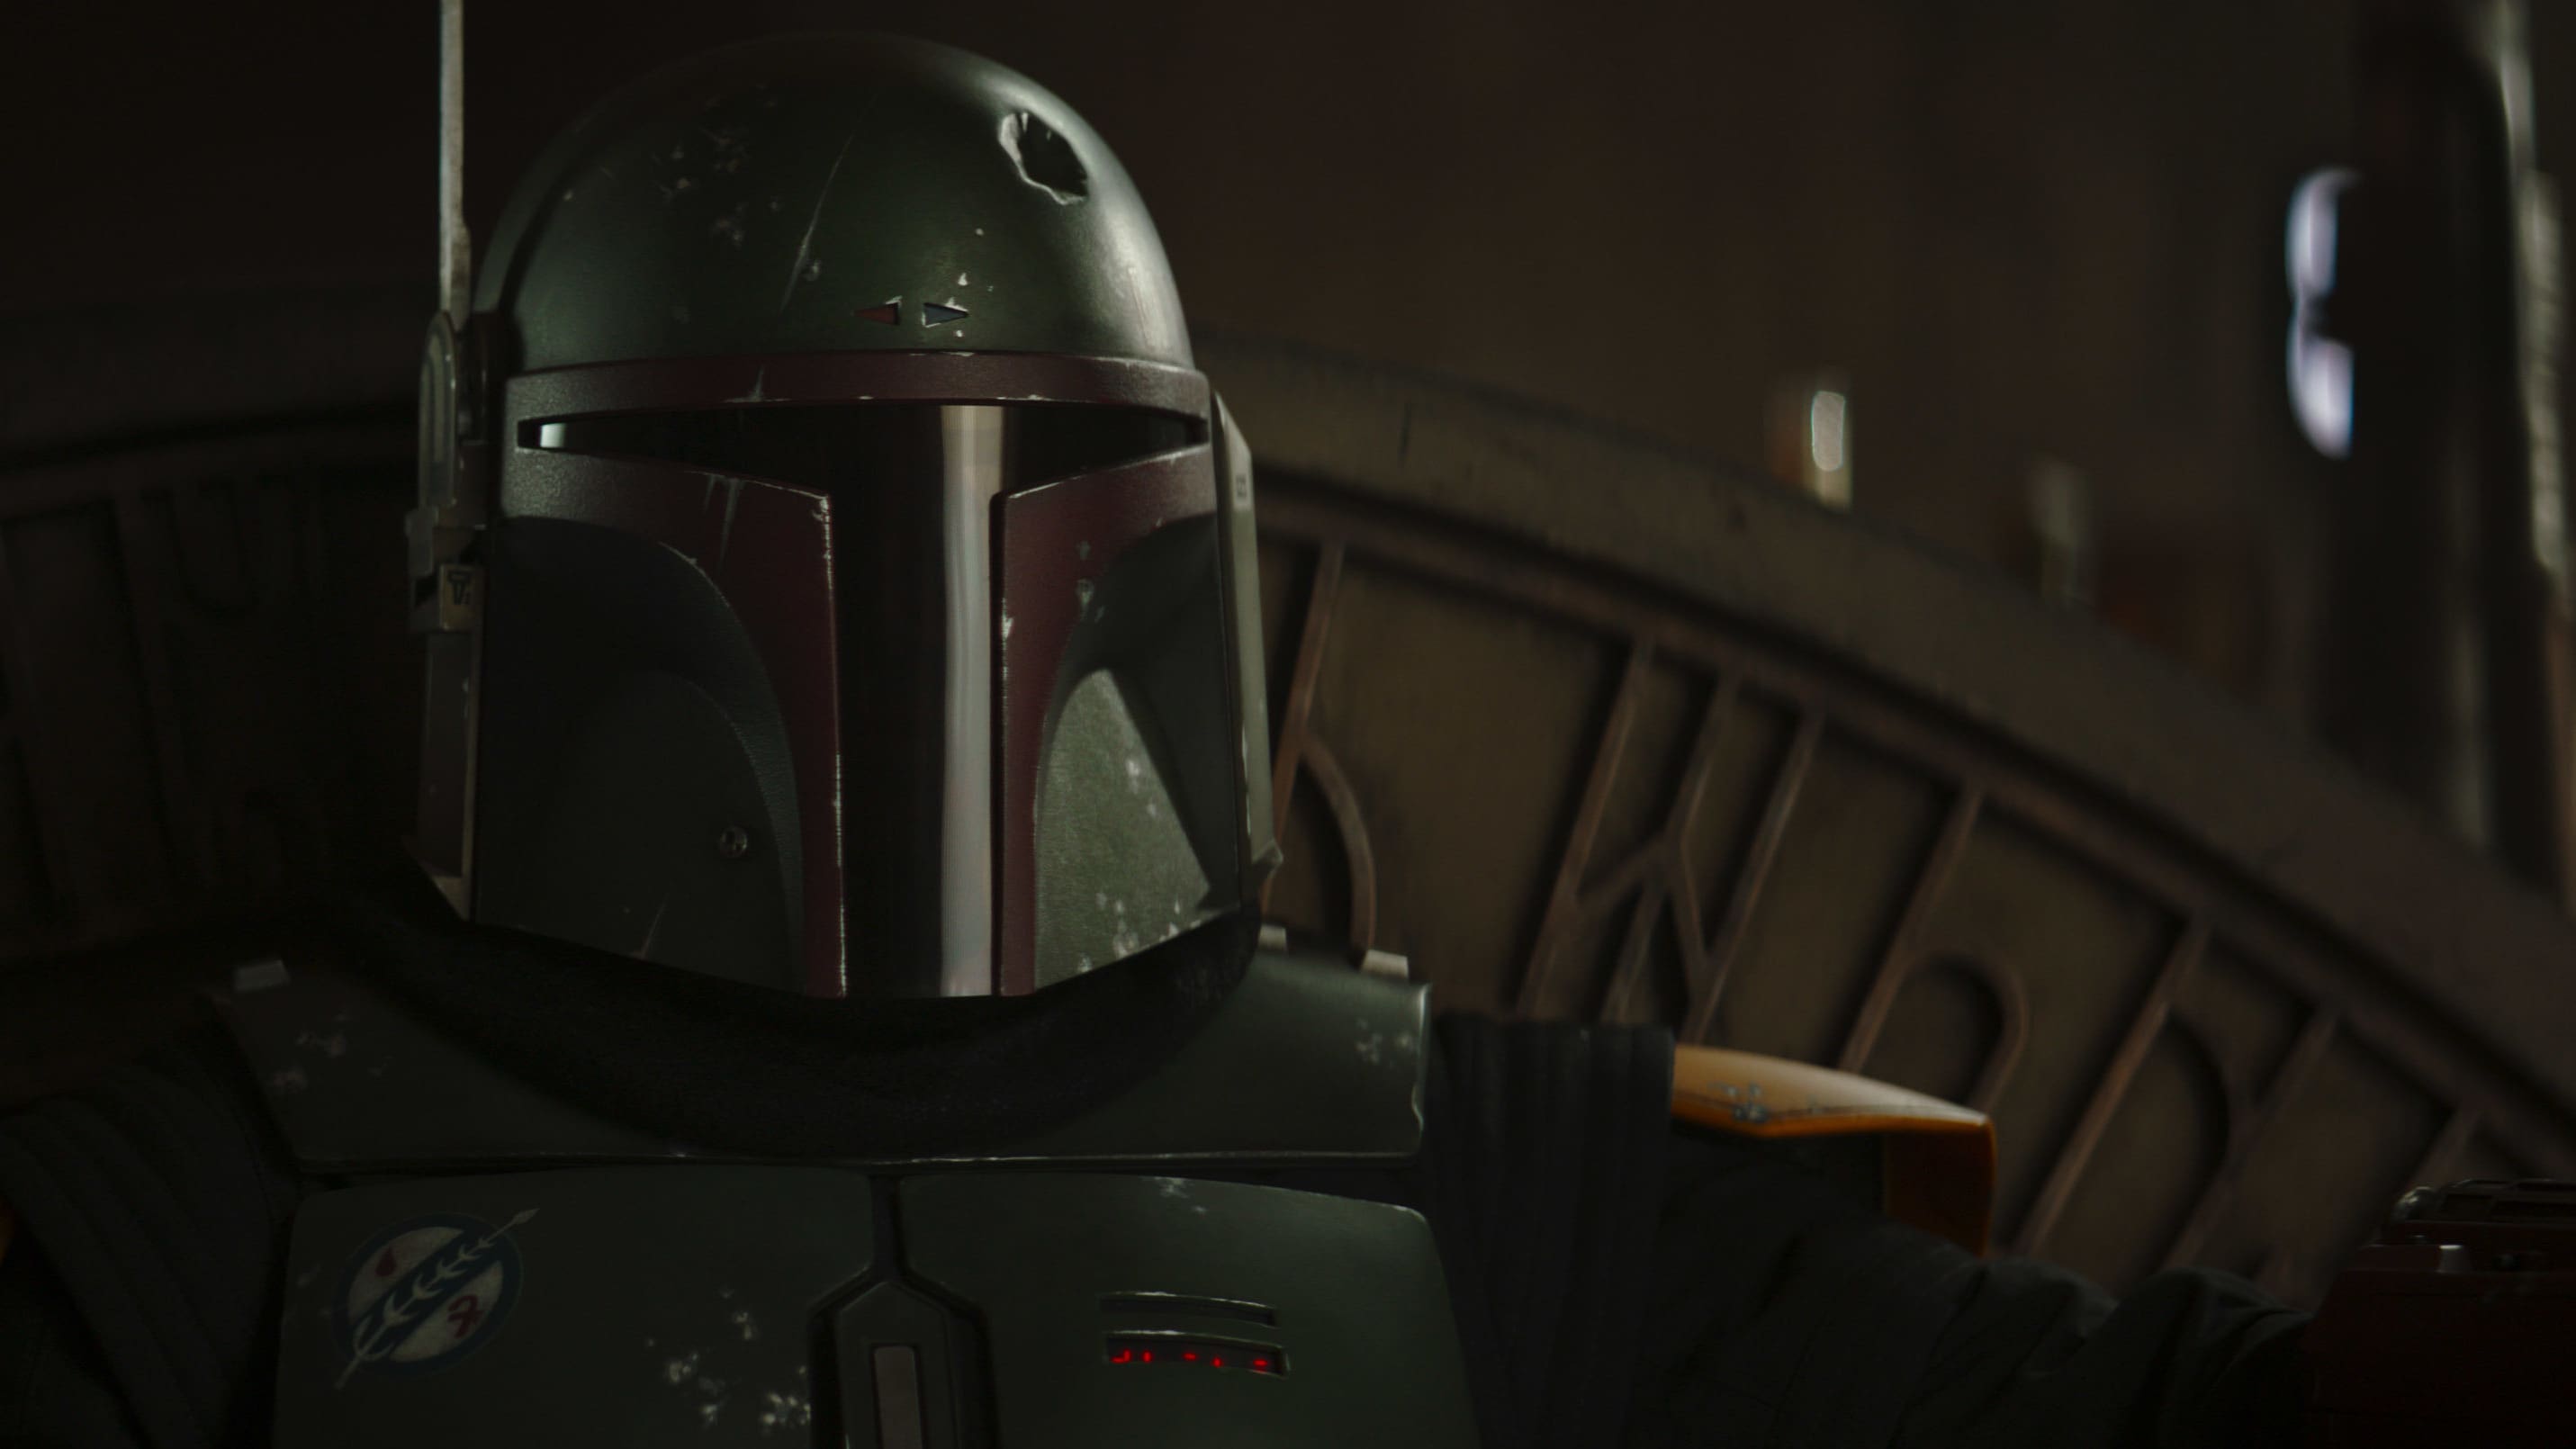 Boba Fett “Wanted Posters” Ushered the Bounty Hunter into the Star Wars Universe